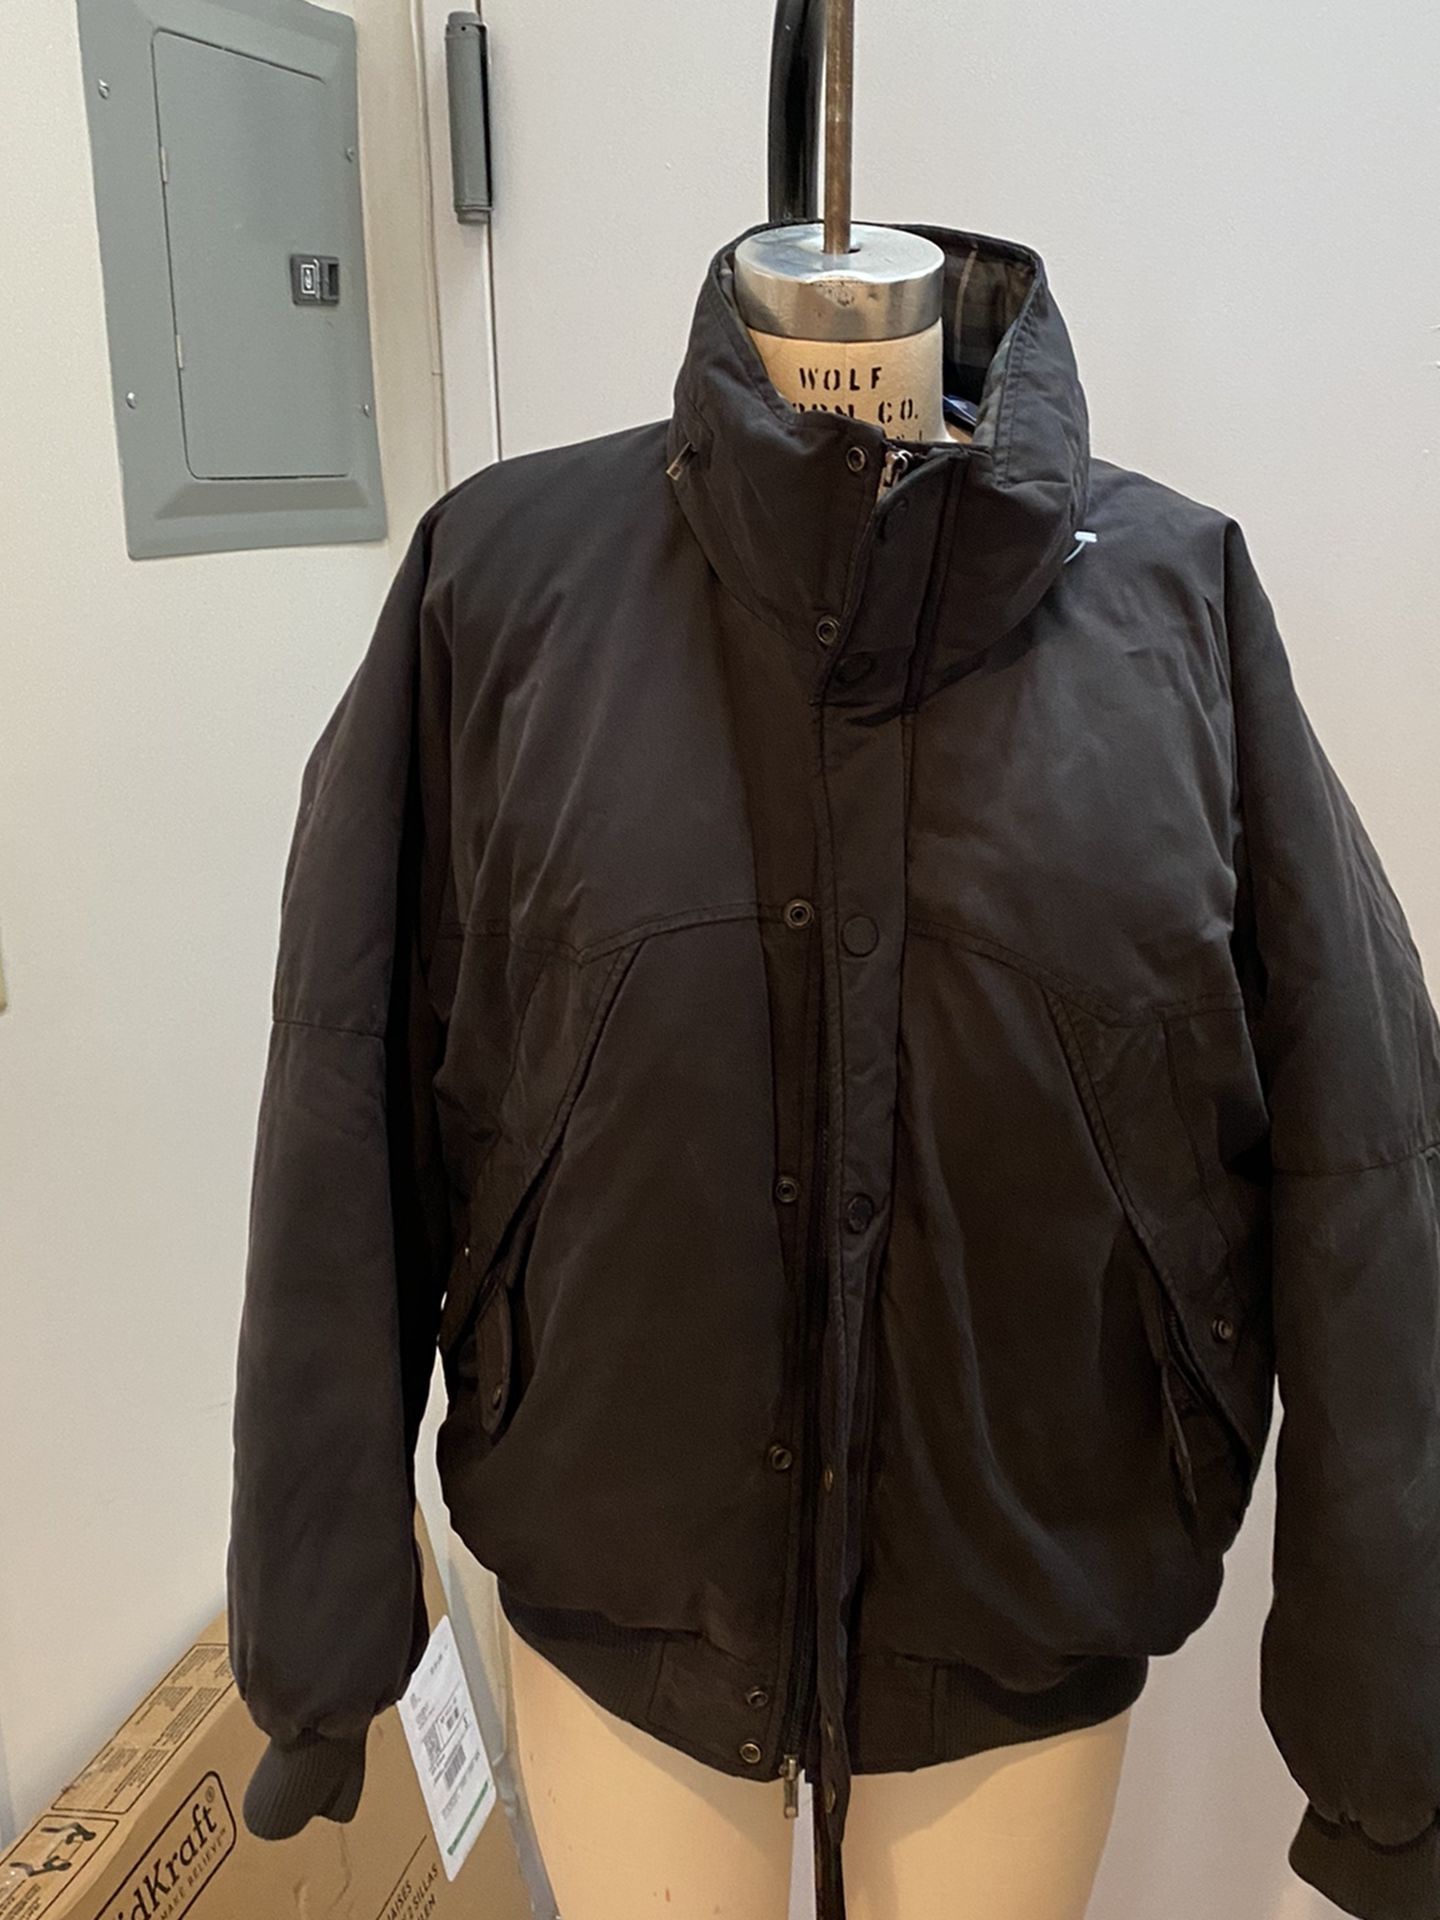 Burberry Men's Black Down Puffer Coat Jacket Size XL. Condition is "Pre-owned". See pictures ask questions and make an offer!